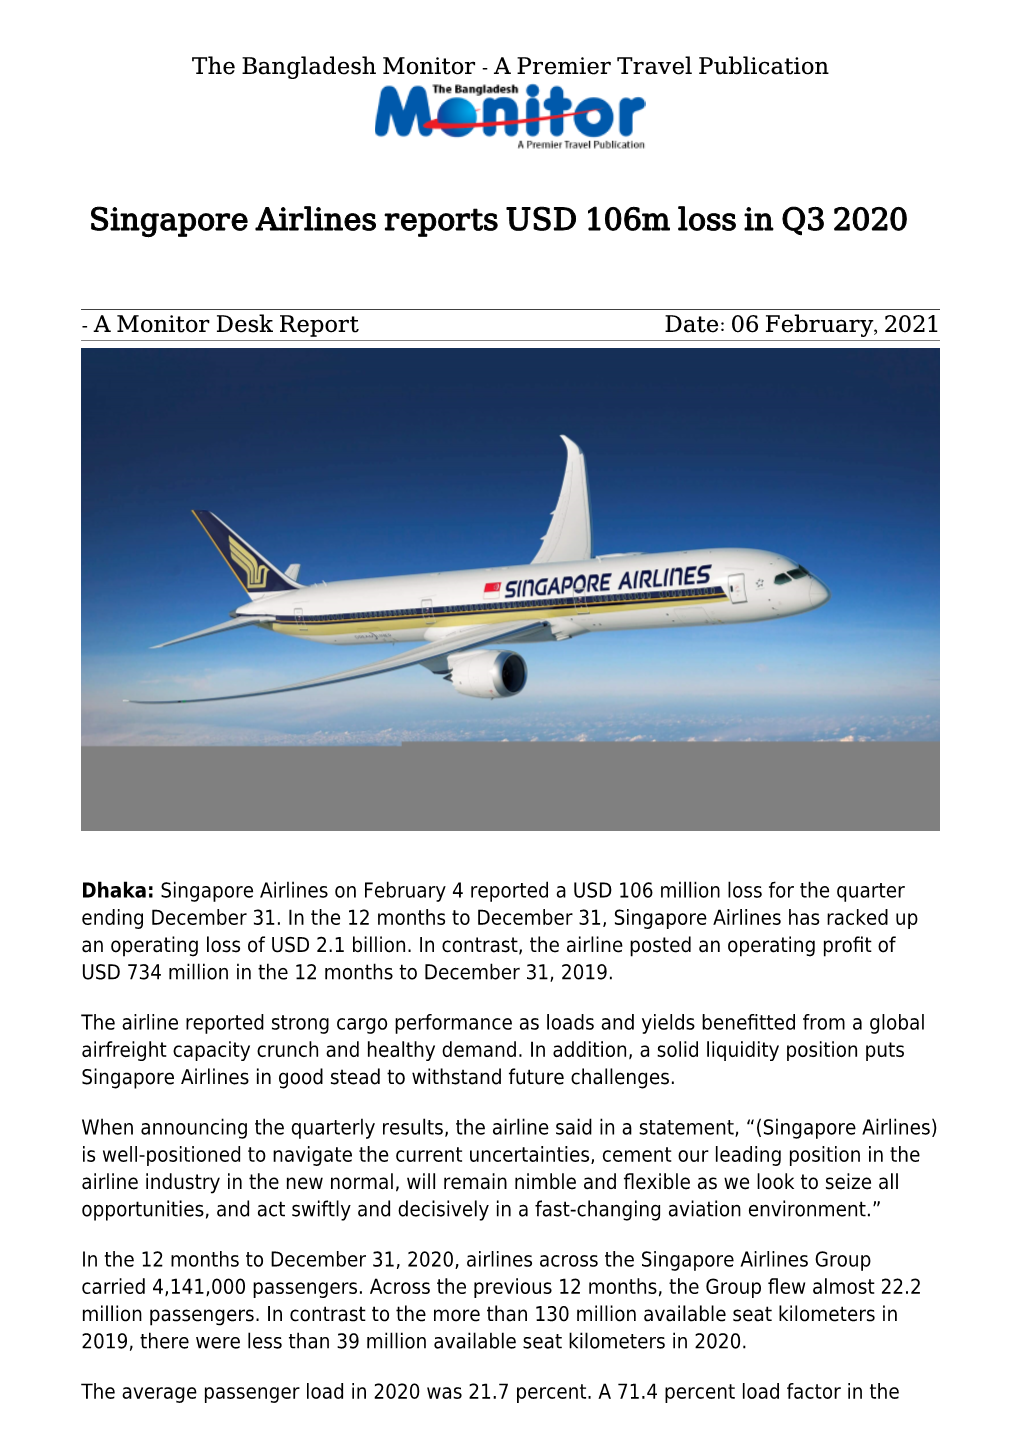 News for Singapore Airlines, They Are Buckling Down to Deal with Whatever Gets Thrown at It